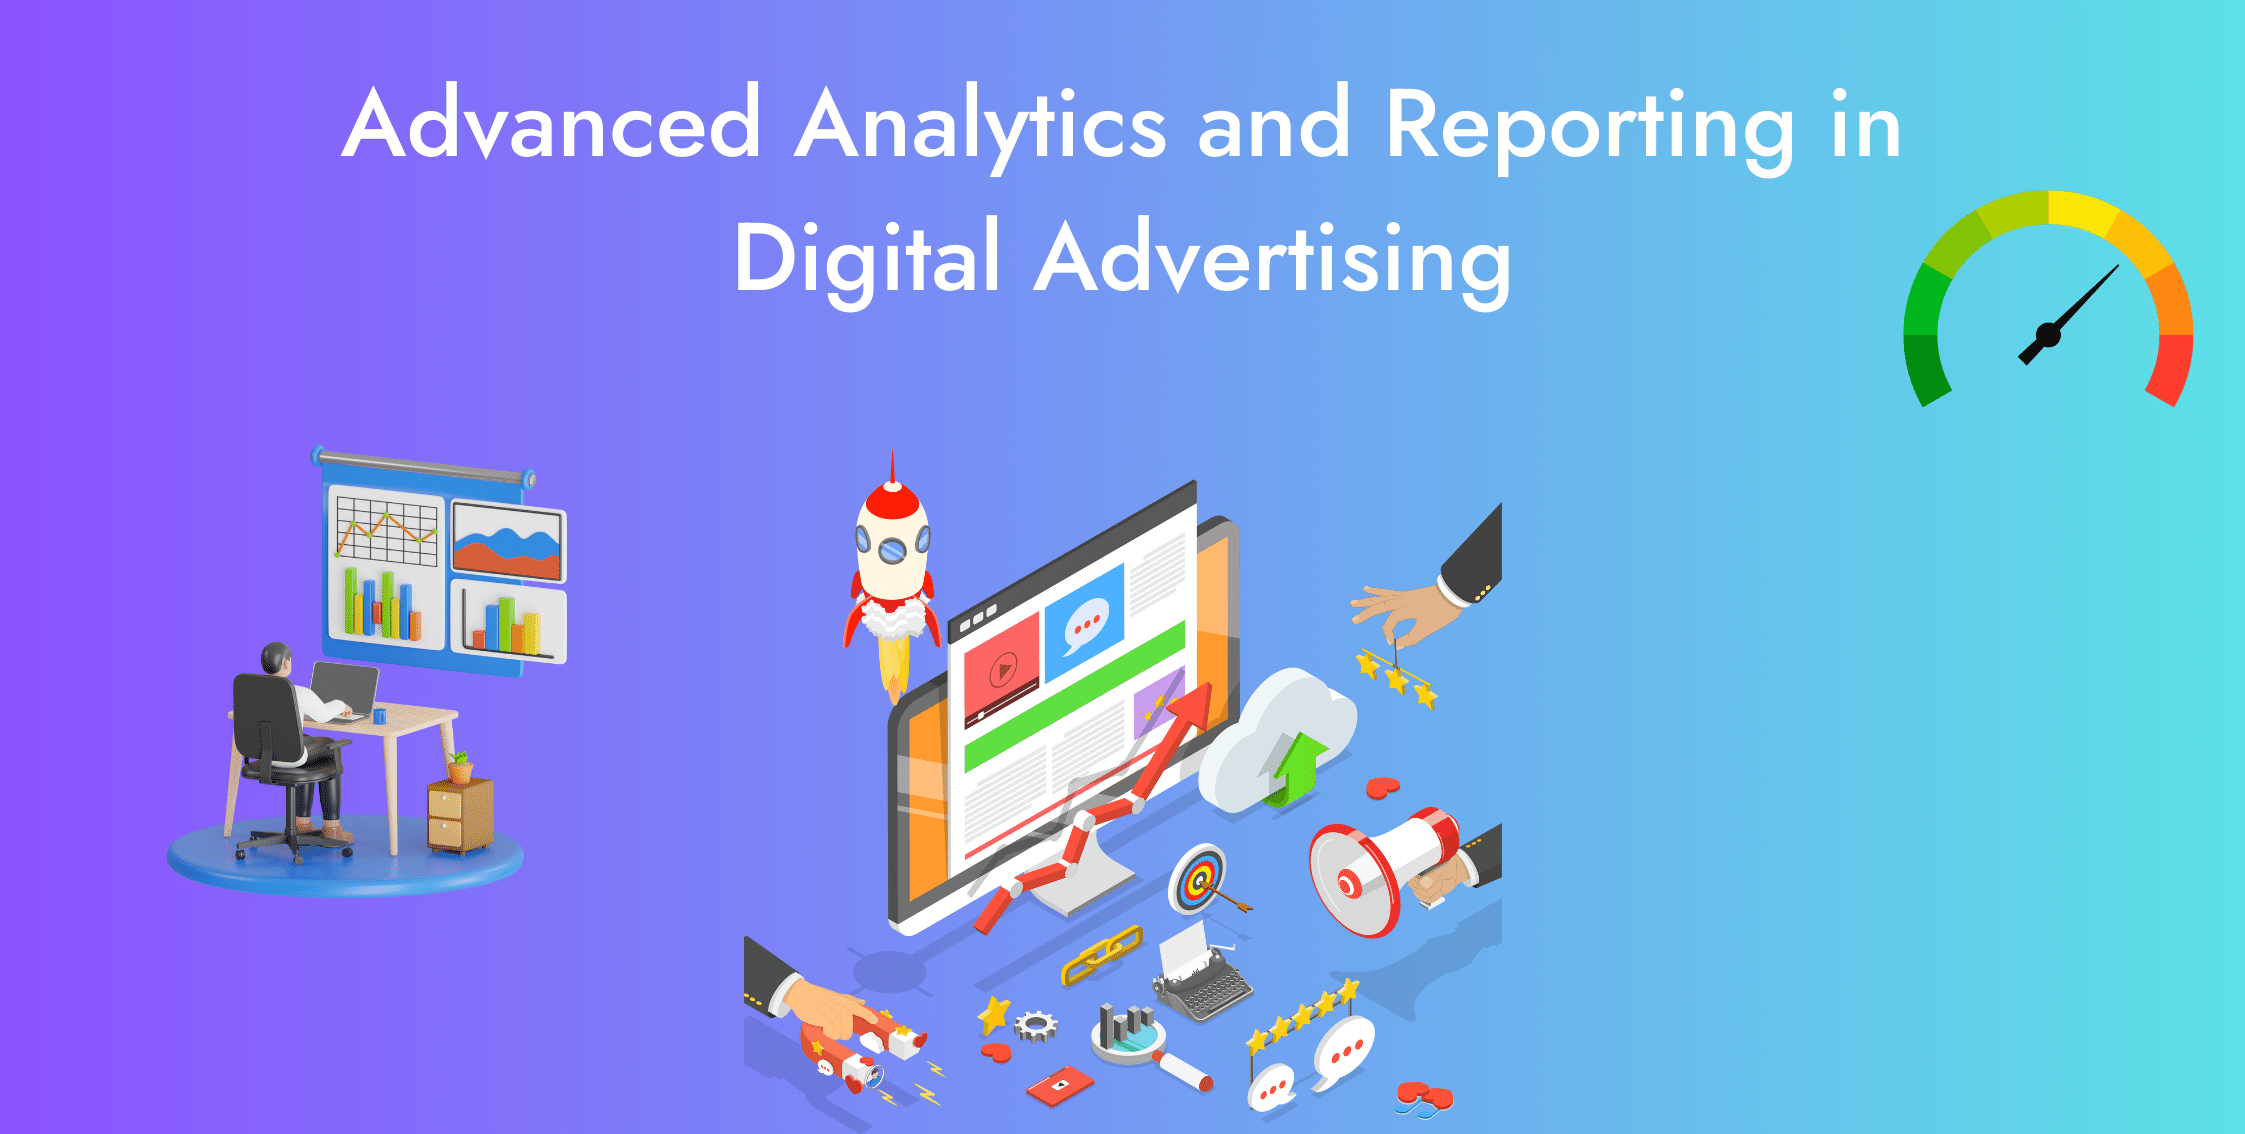 Advanced Analytics and Reporting in Digital Advertising